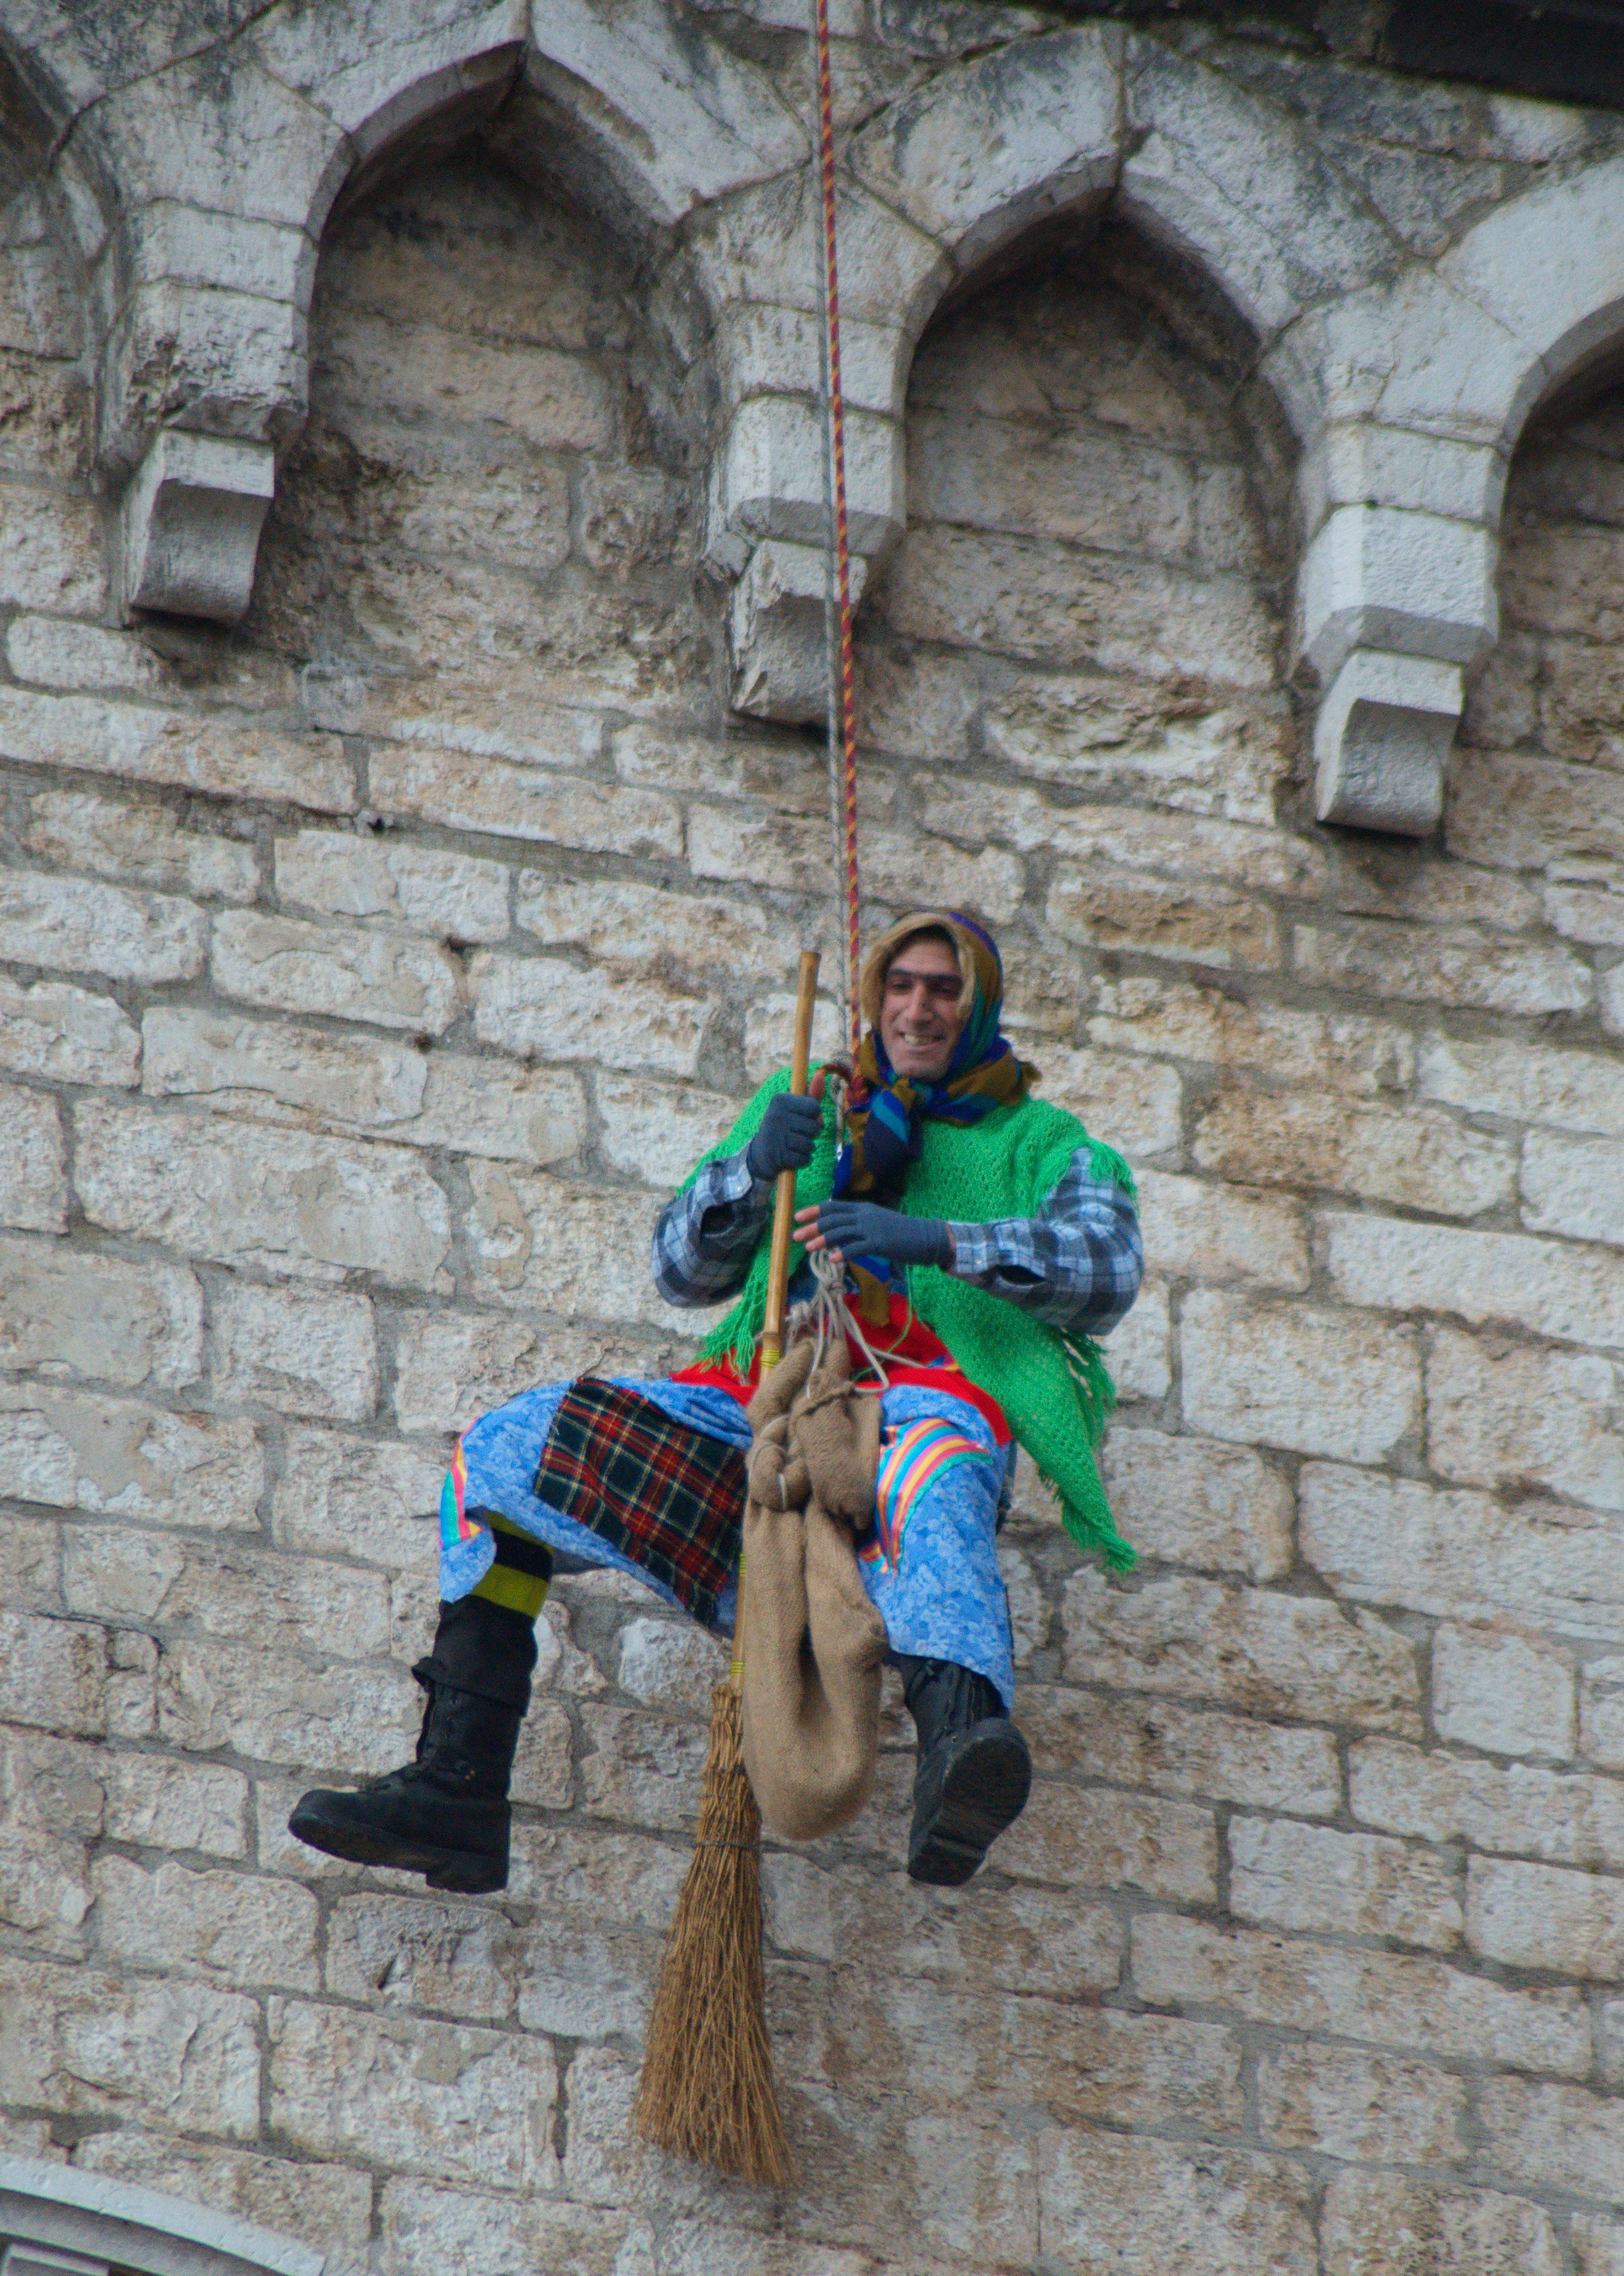 An Italian firefighter dressed up as the Befana descends from Gubbio’s medieval buildings. By Beatrice - Own work, CC BY-SA 3.0, https://commons.wikimedia.org/w/index.php?curid=17930291